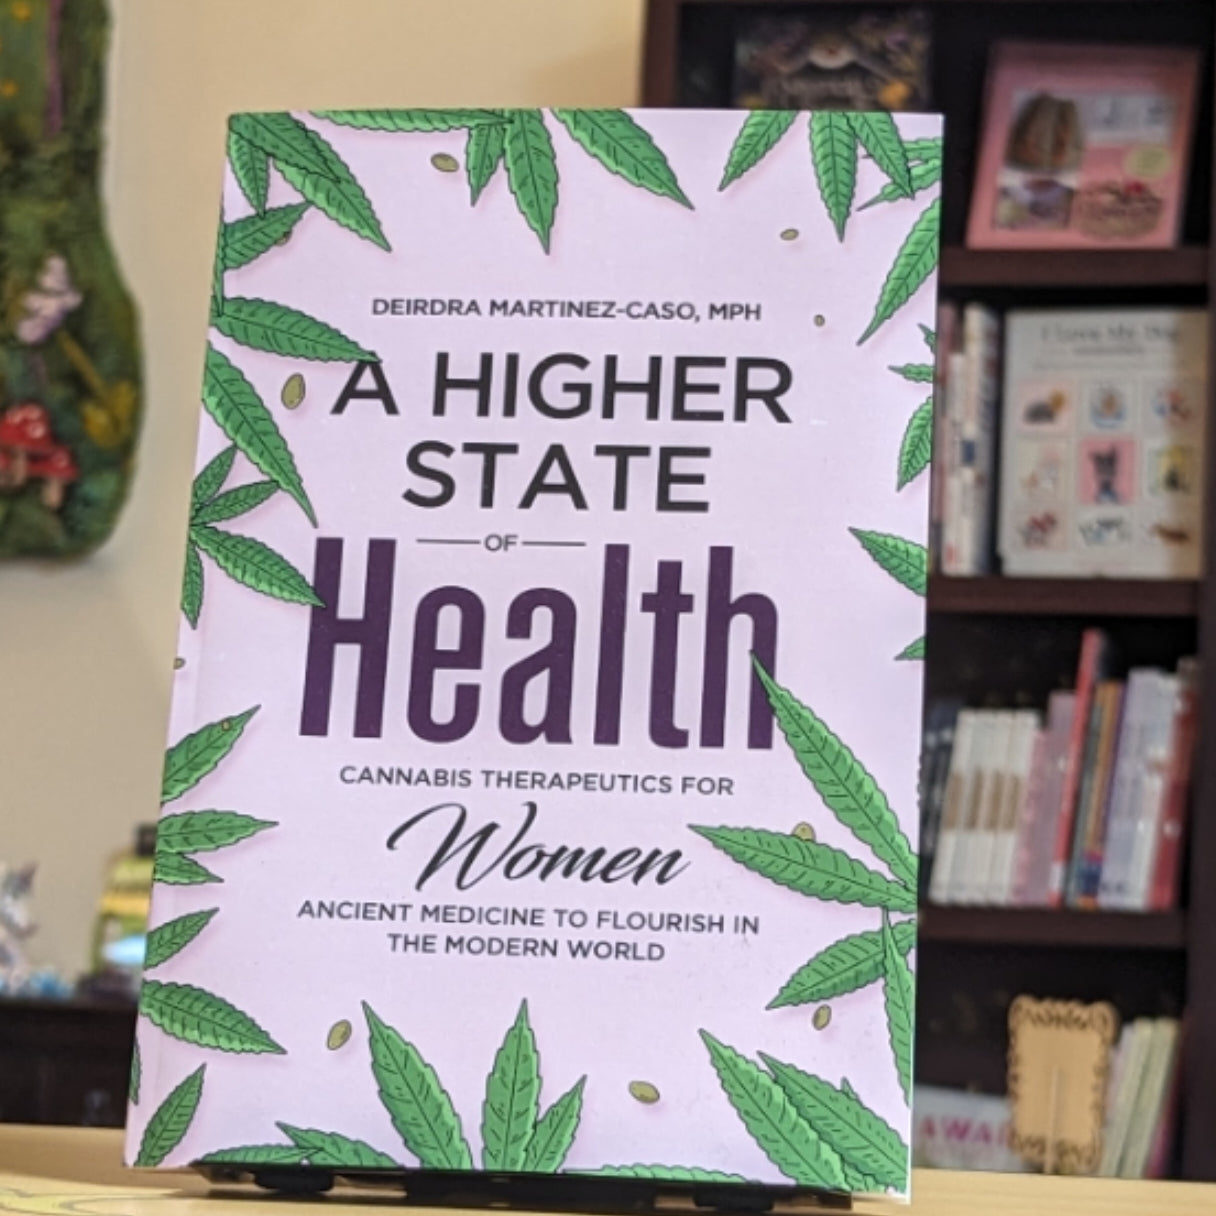 A Higher State of Health: Cannabis Therapeutics for Women: Ancient Medicine to Flourish in the Modern World